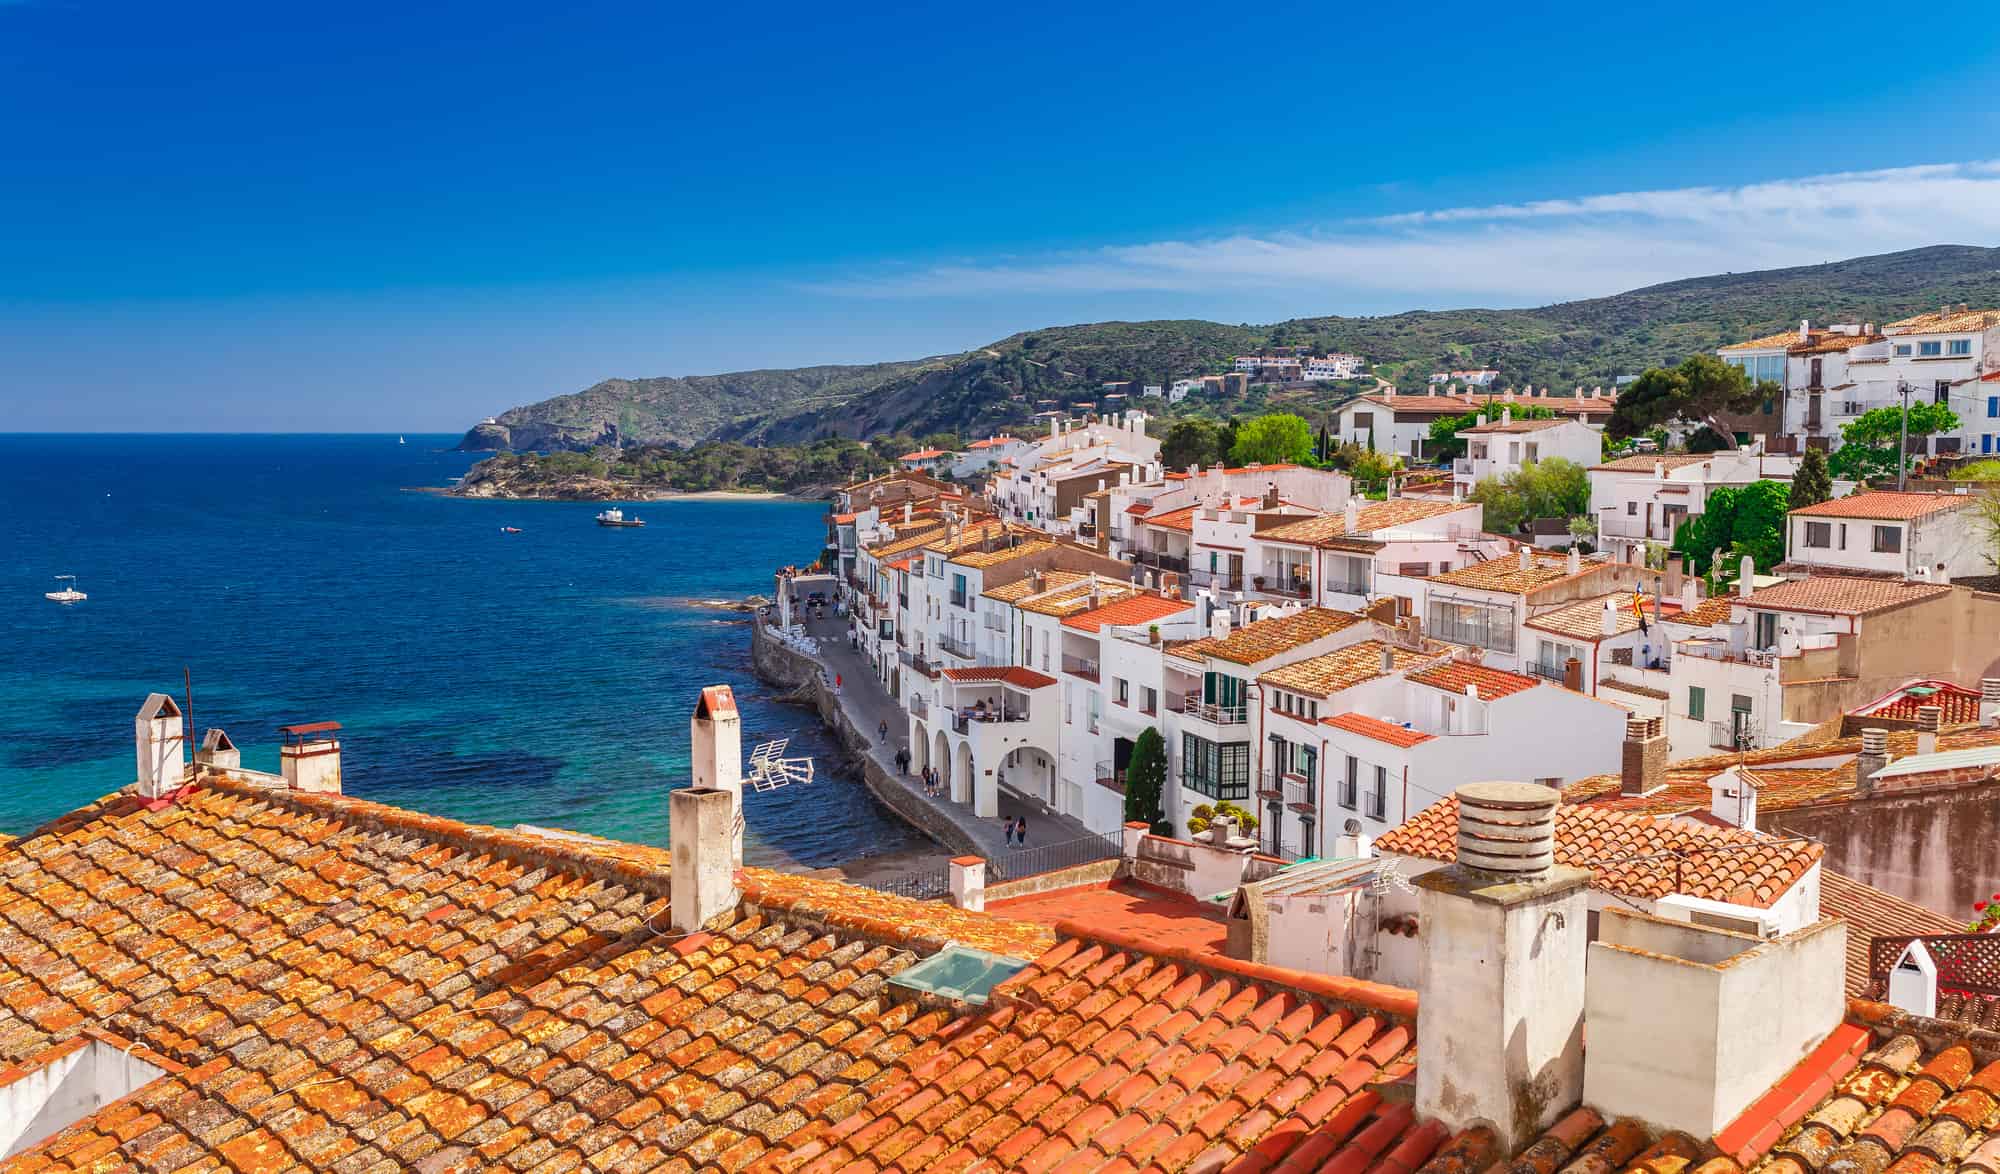 Top view in Cadaques, Catalonia, Spain near of Barcelona. Scenic old town with nice beach and clear blue water in bay. Famous tourist destination in Costa Brava with Salvador Dali landmark